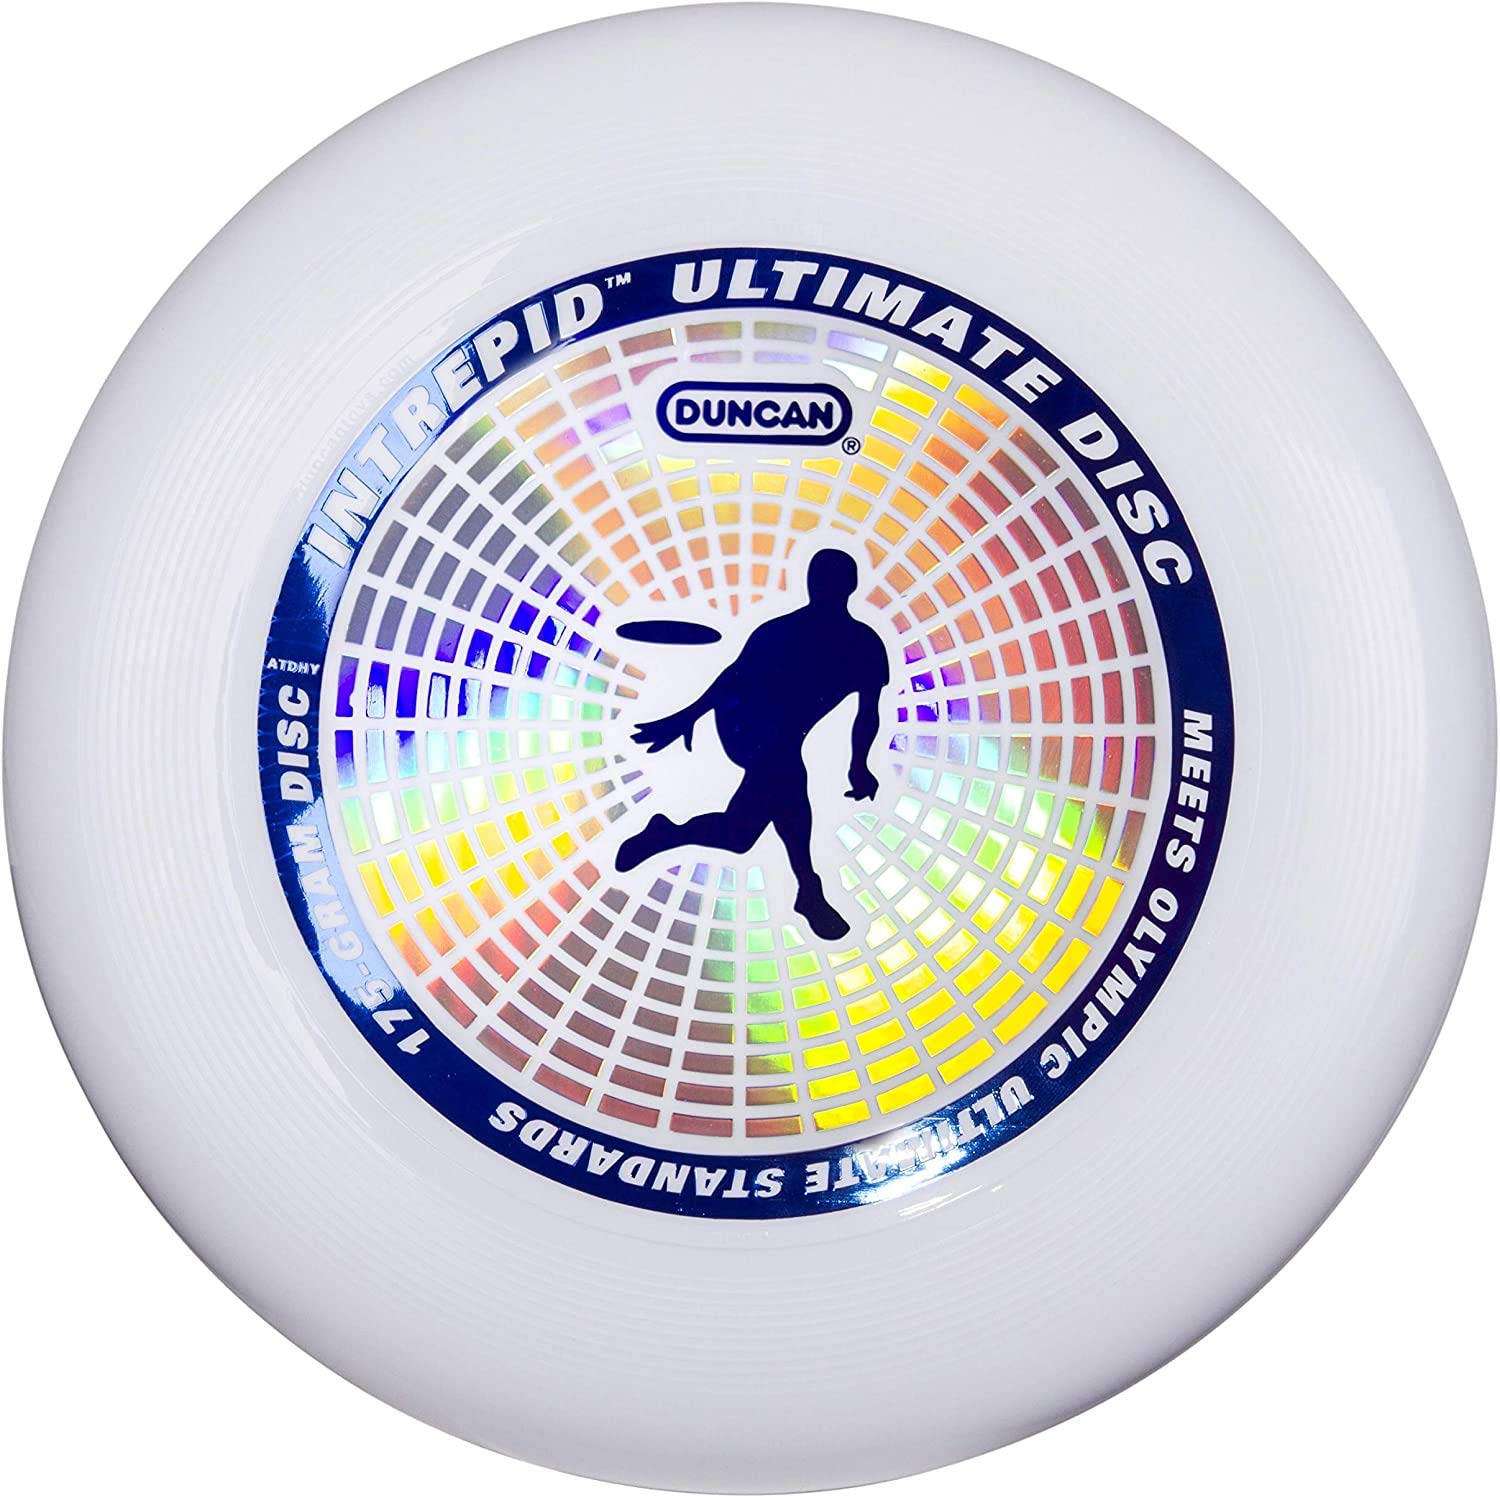 Duncan Toys Duncan Intrepid Ultimate competition Disc, 175g Precision Weighted Flying Disc, White